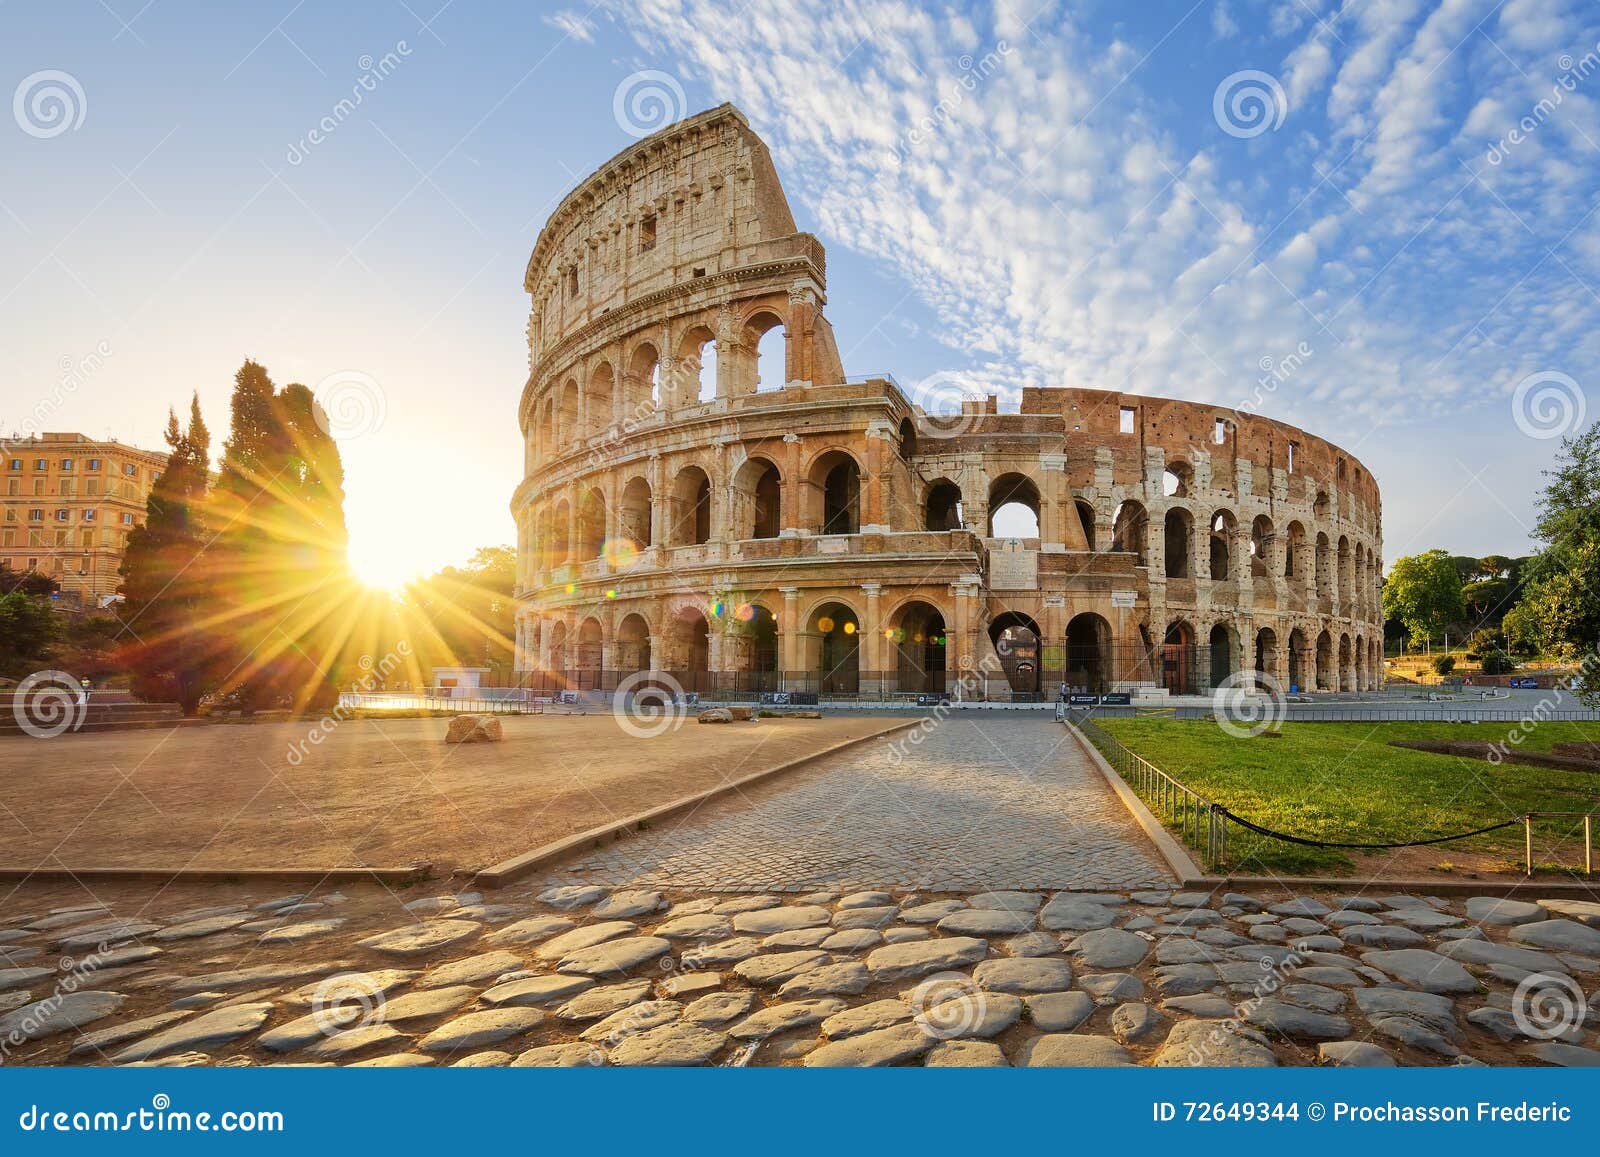 colosseum in rome and morning sun, italy